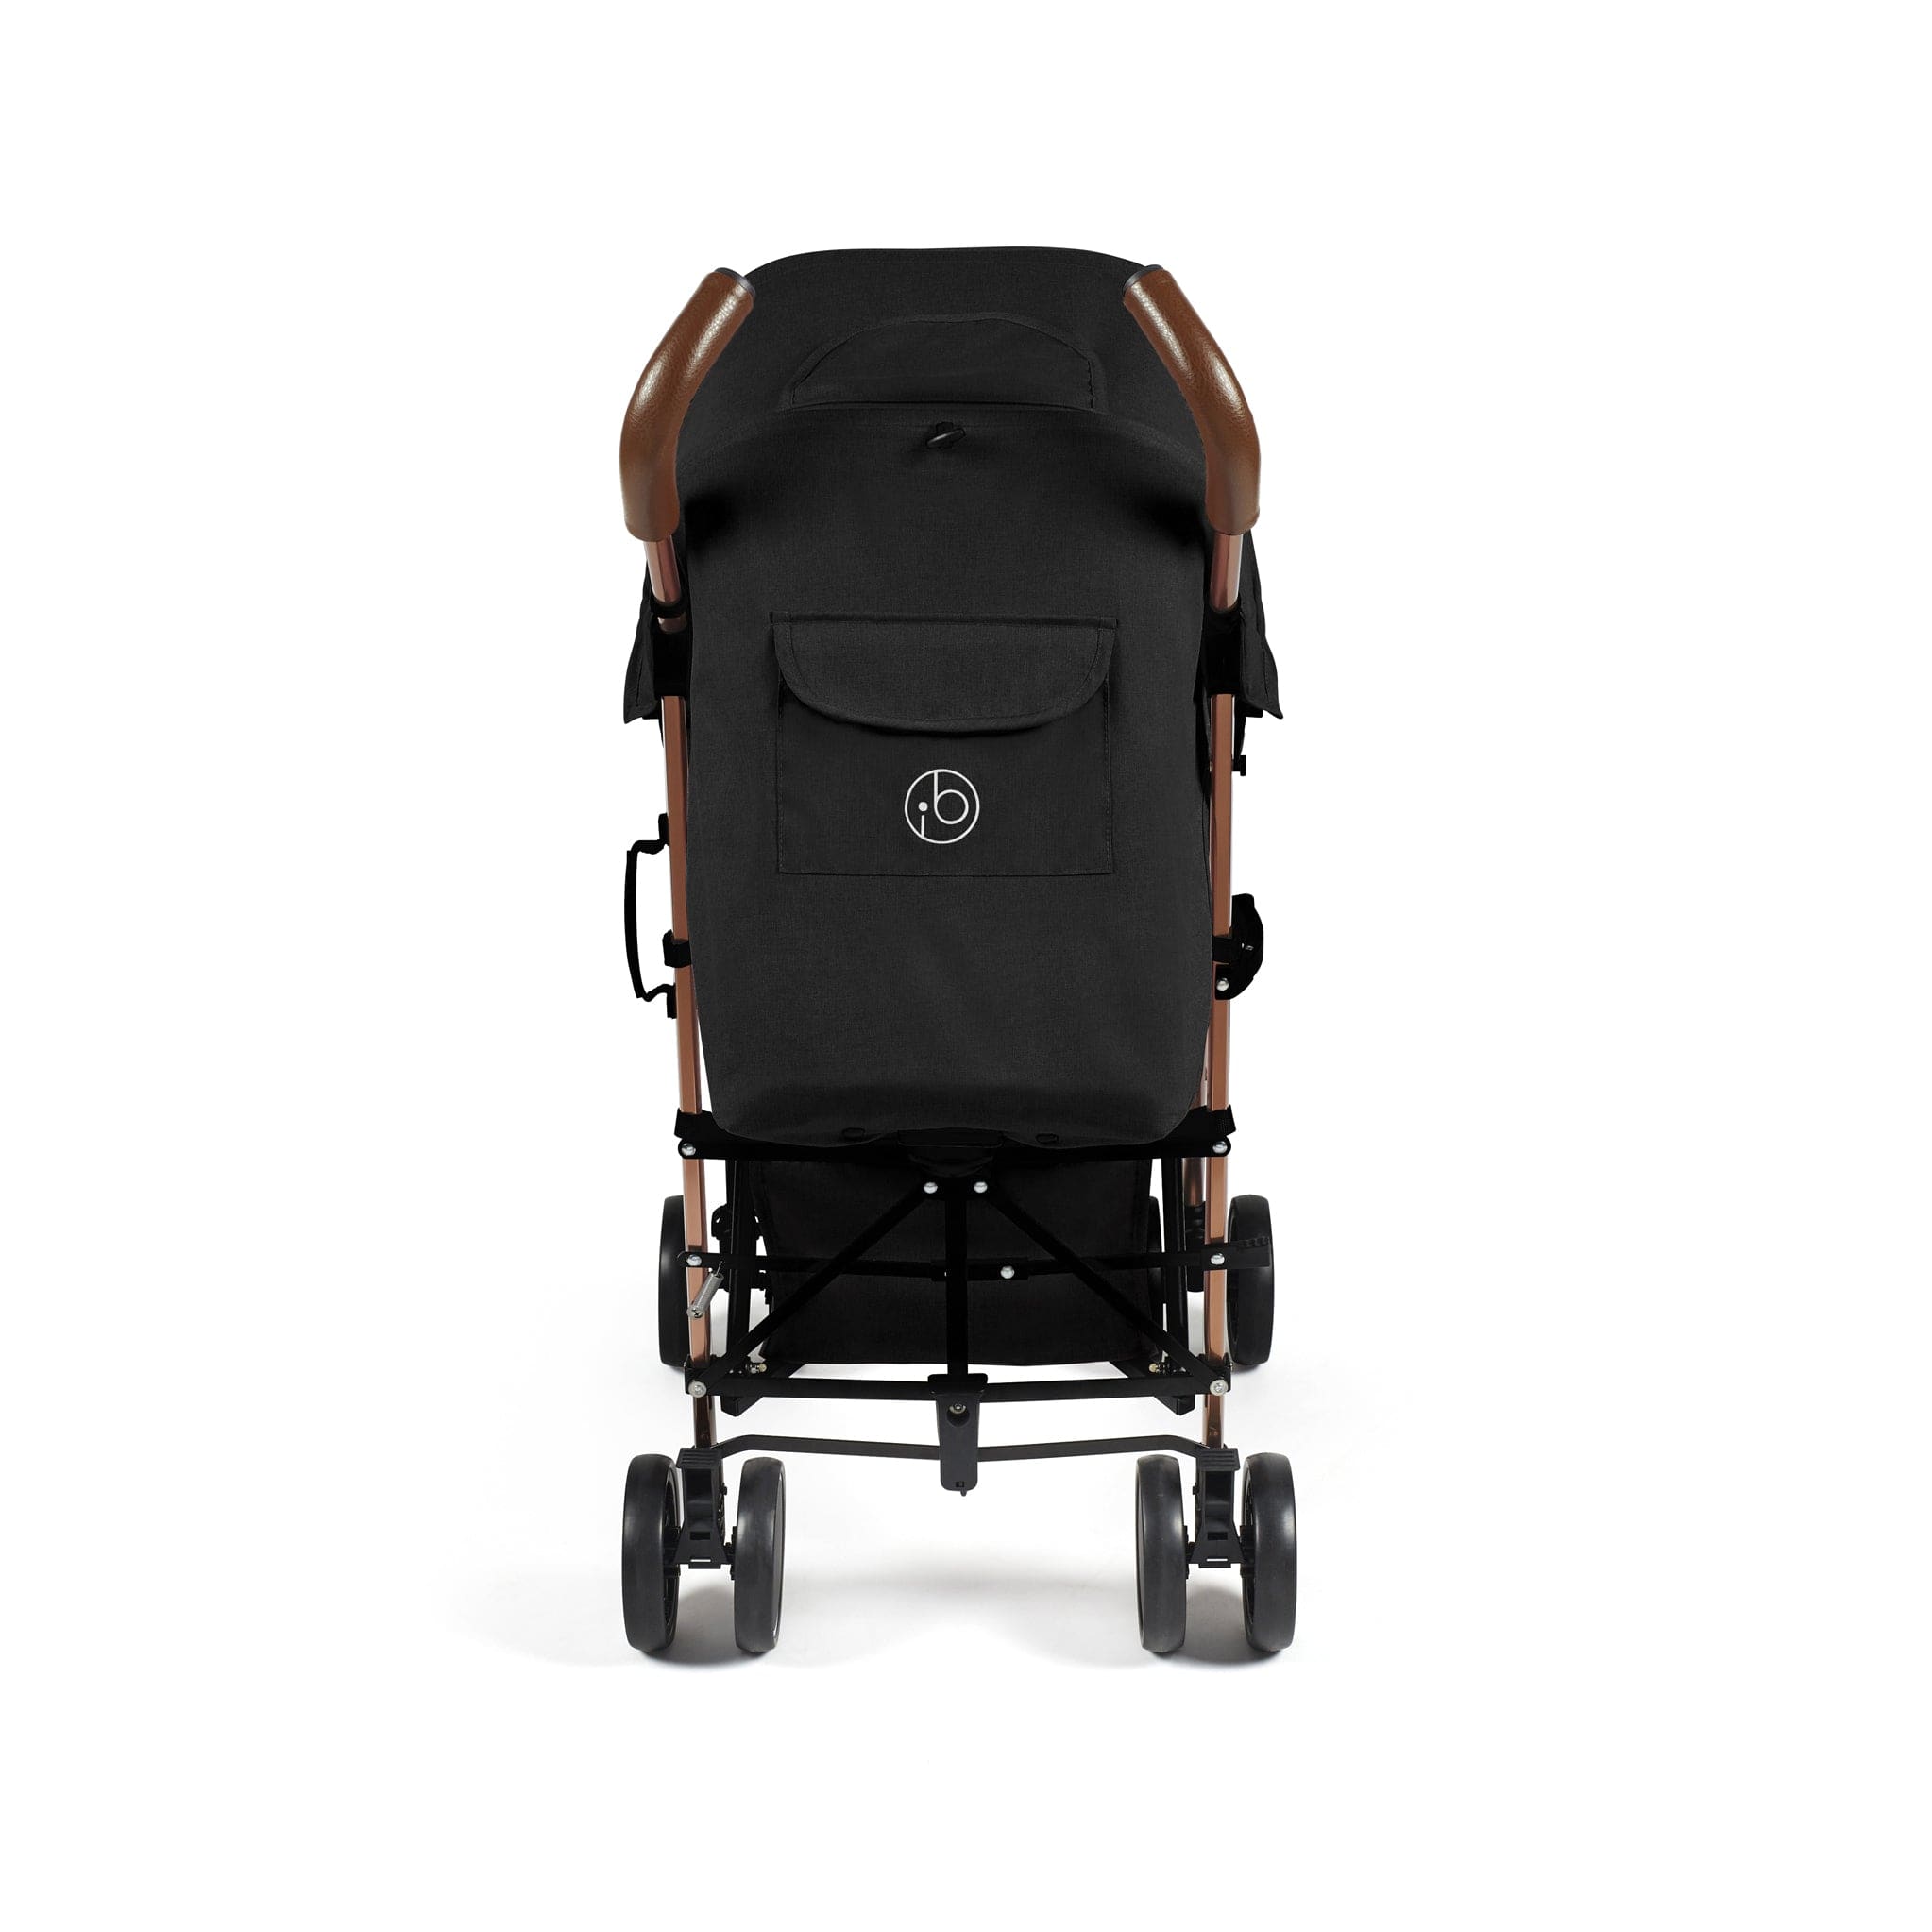 Ickle Bubba Discovery Max Stroller Rose Gold/Black Pushchairs & Buggies 15-002-200-043 0700355999362